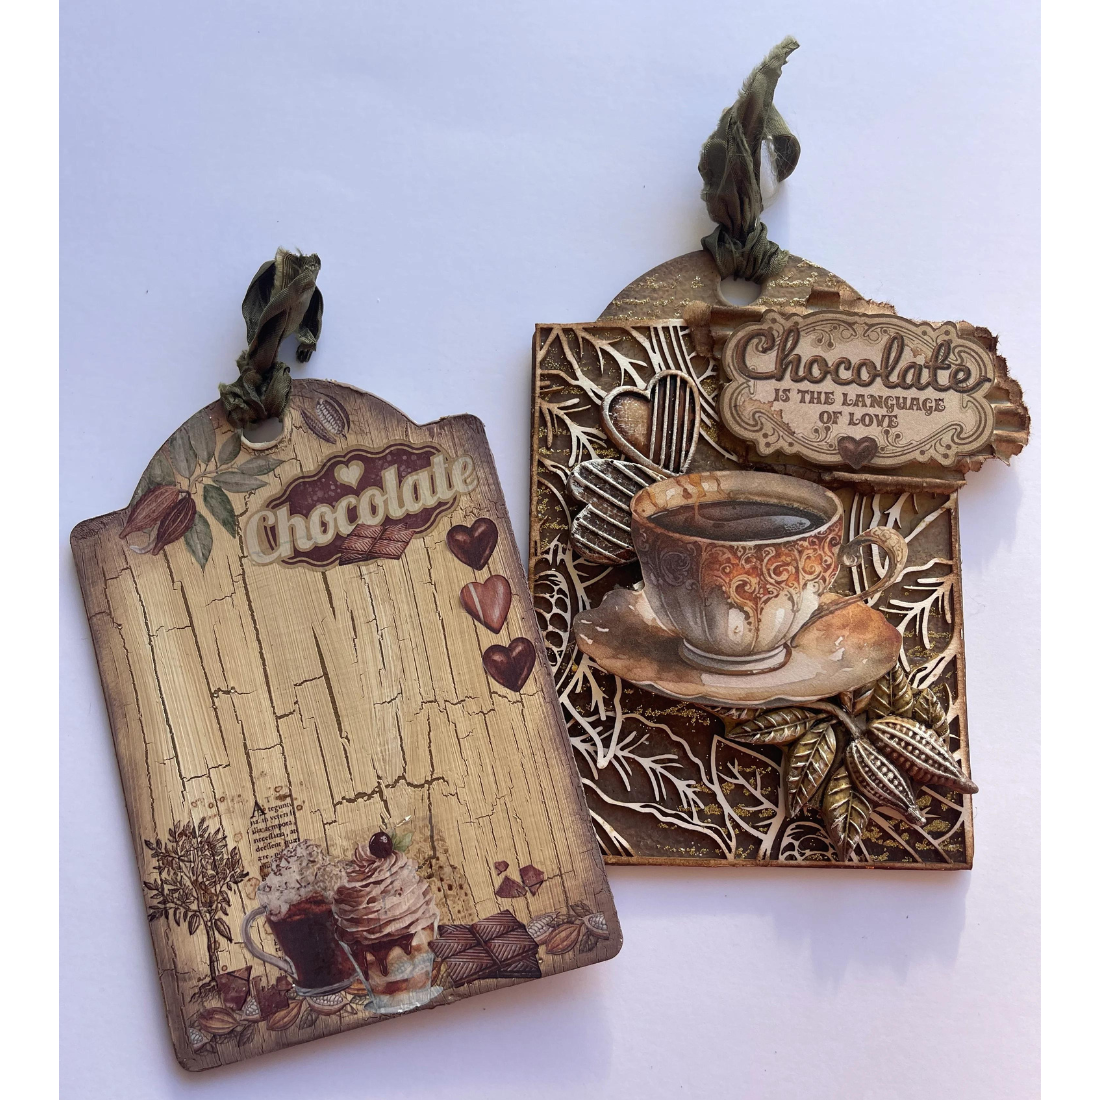 Recortes Die Cuts Coffee And Chocolate DFLDC87